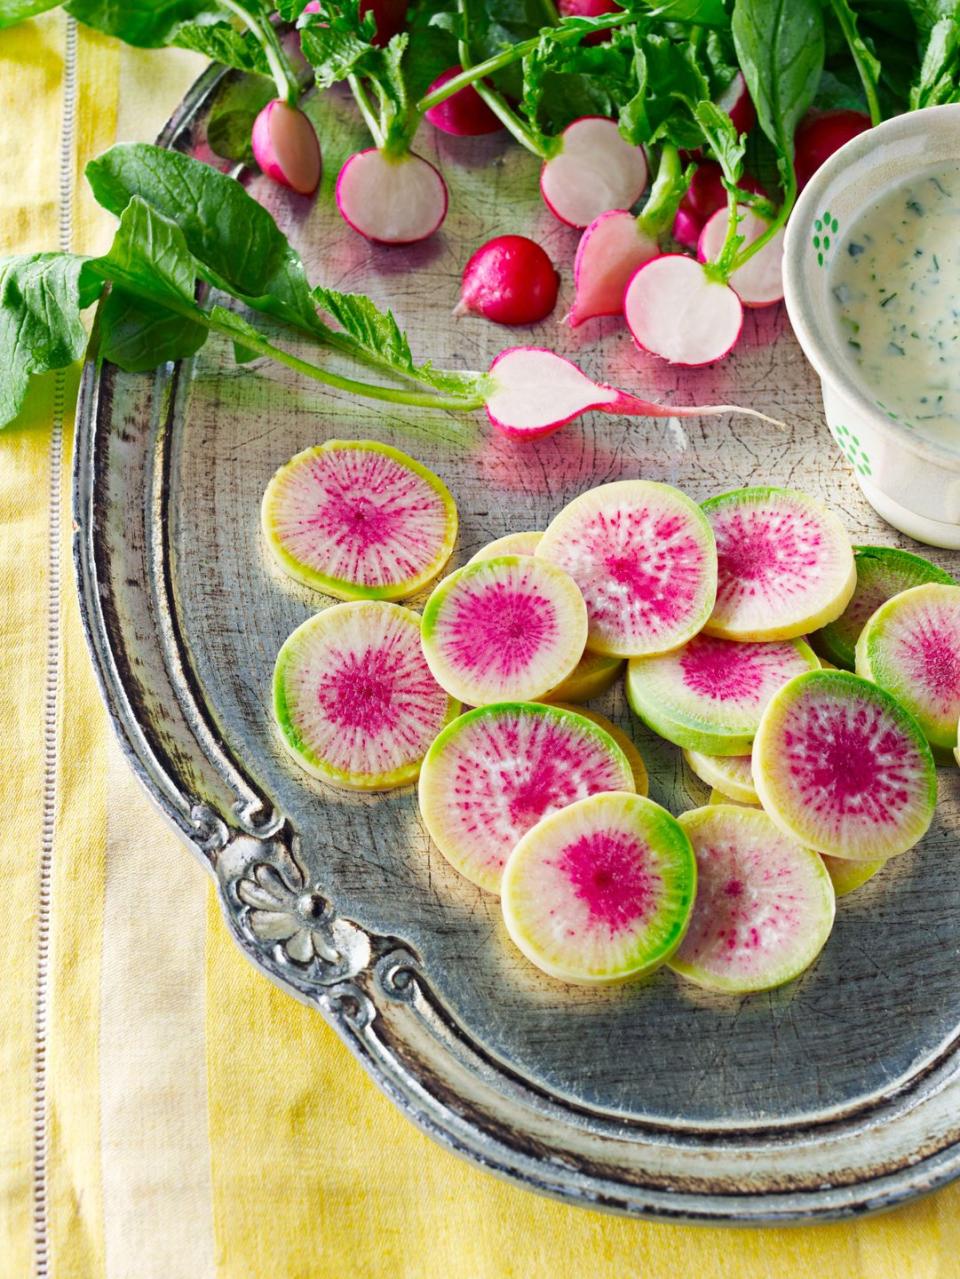 sliced radishes with horseradish buttermilk dip on a silver serving tray